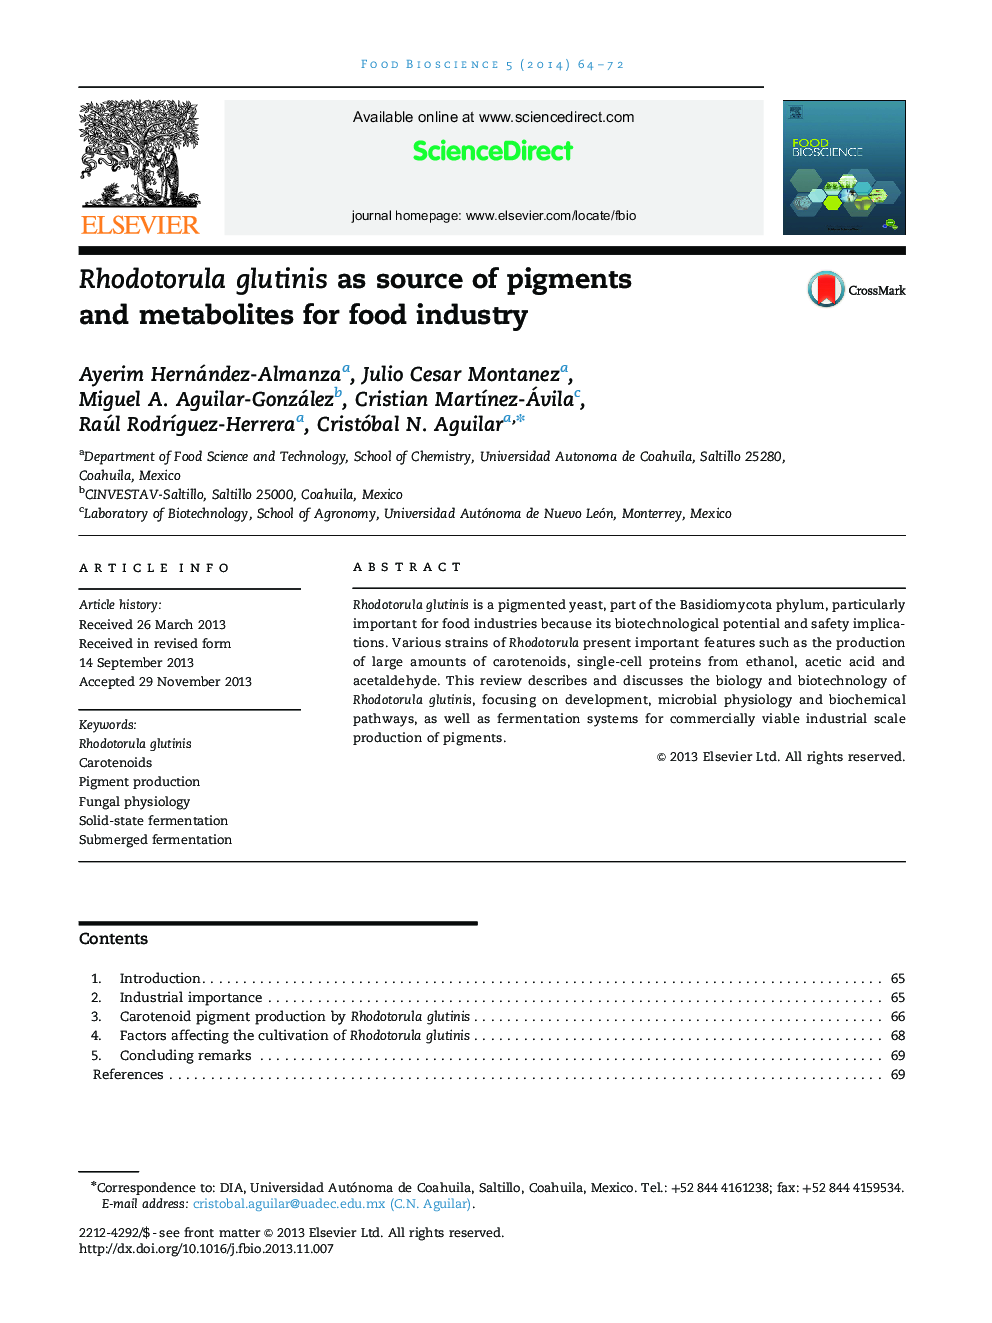 Rhodotorula glutinis as source of pigments and metabolites for food industry